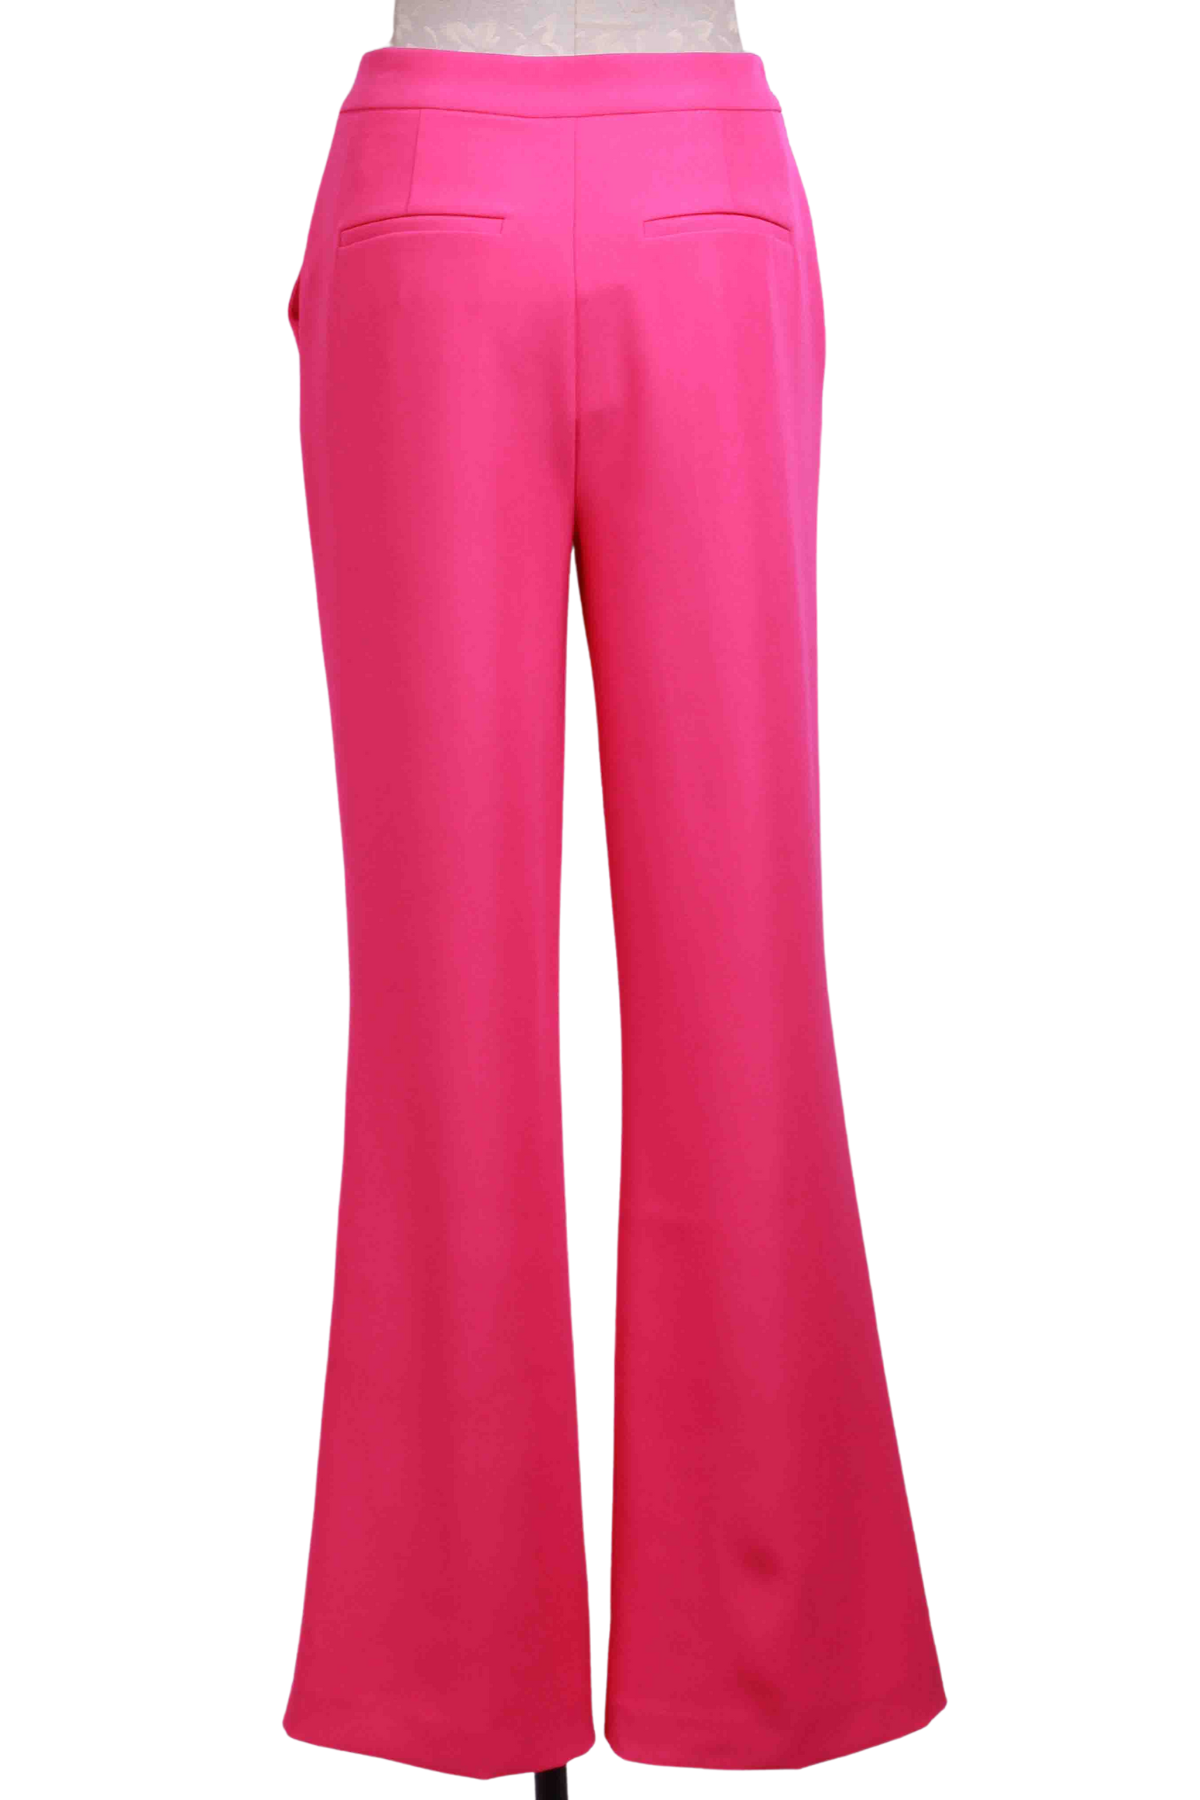 back view of Magenta colored Ashton Crepe Pant by Generation Love